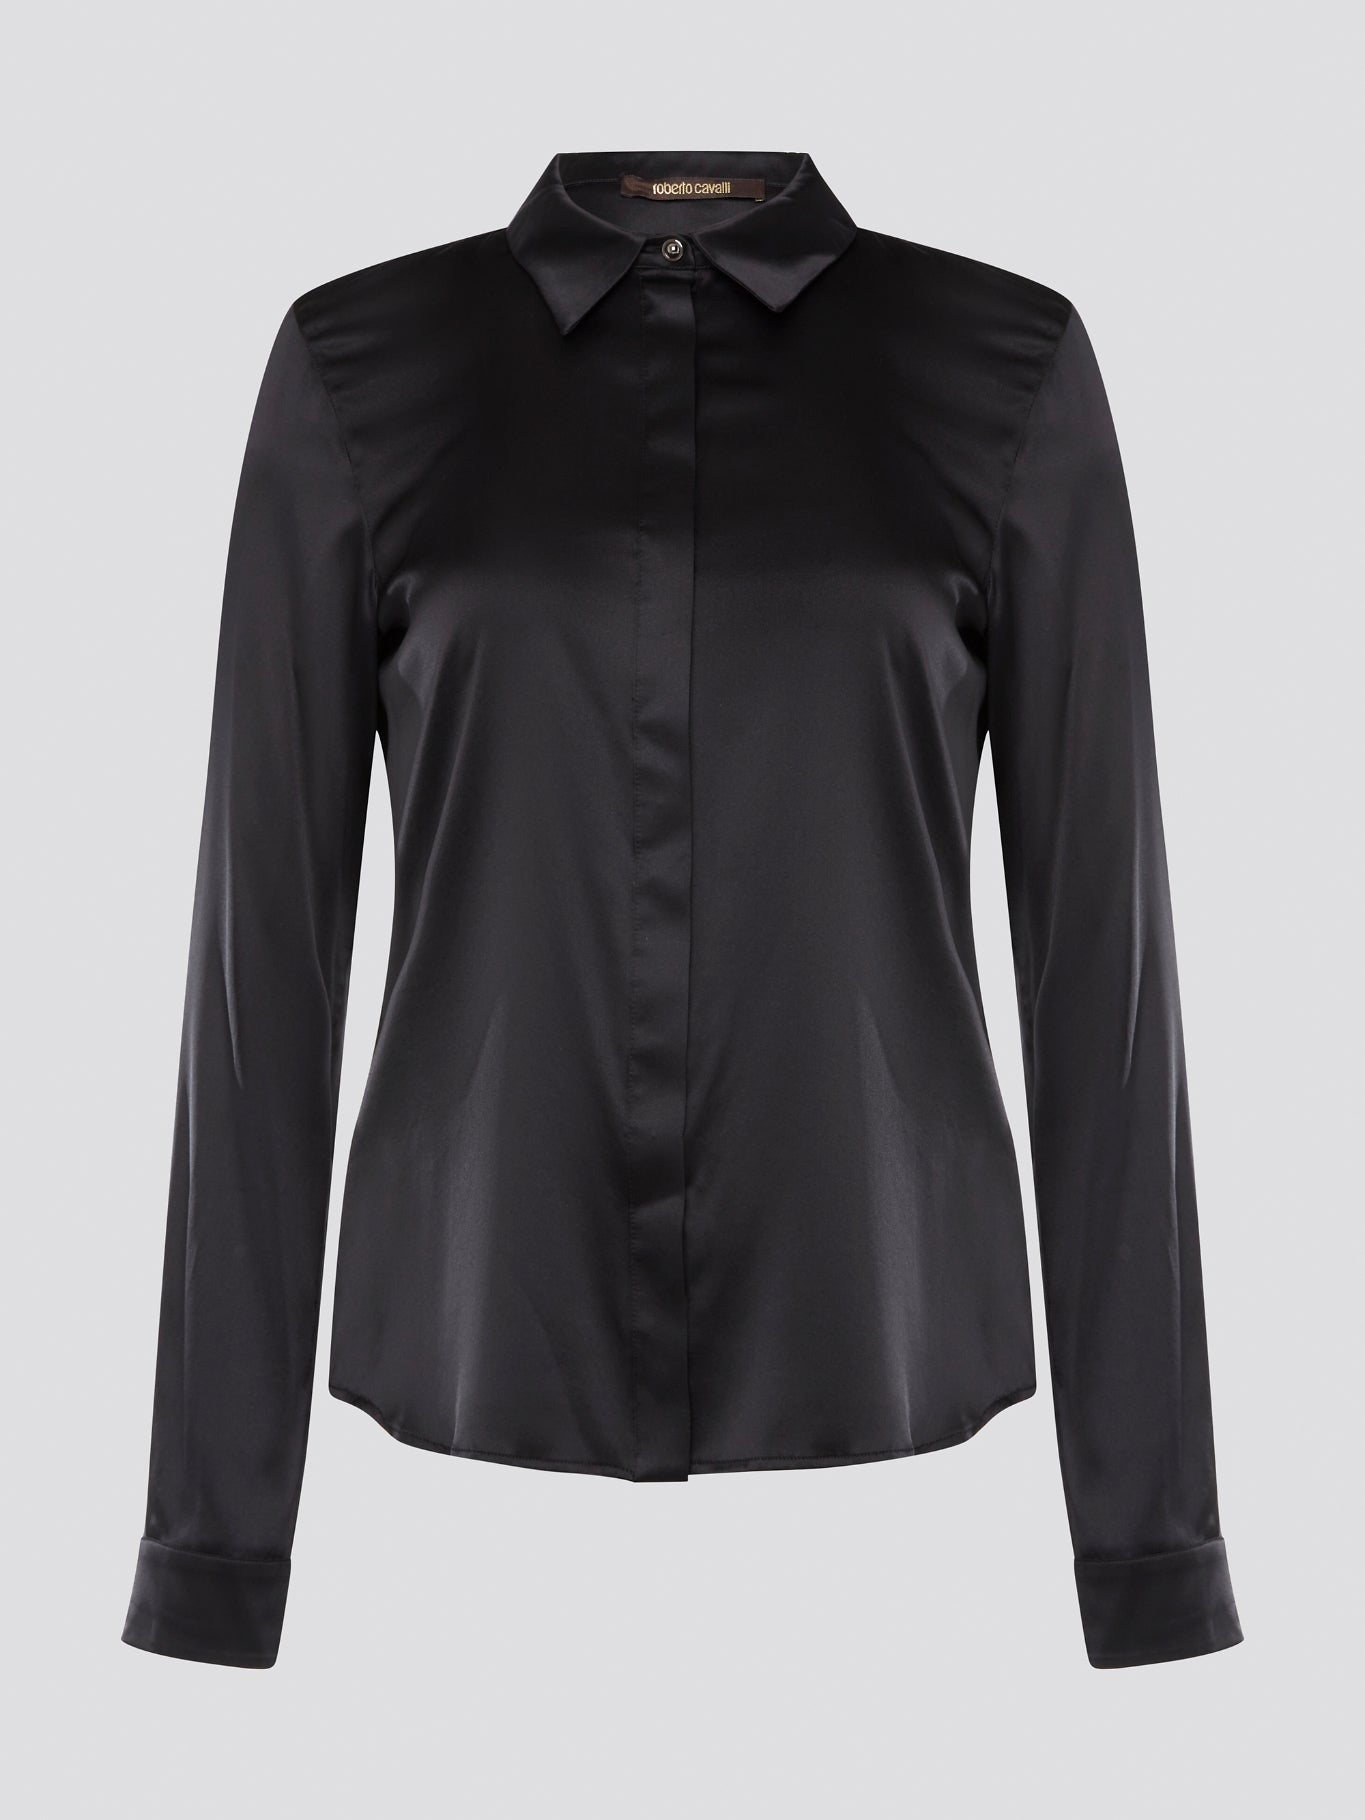 Step out in sleek and sophisticated style with this black satin shirt from Roberto Cavalli, a luxurious addition to your wardrobe. The silky smooth fabric drapes effortlessly, while the tailored fit adds a touch of elegance to any outfit. Perfect for a night out on the town or a special event, this shirt is sure to turn heads and make a statement.